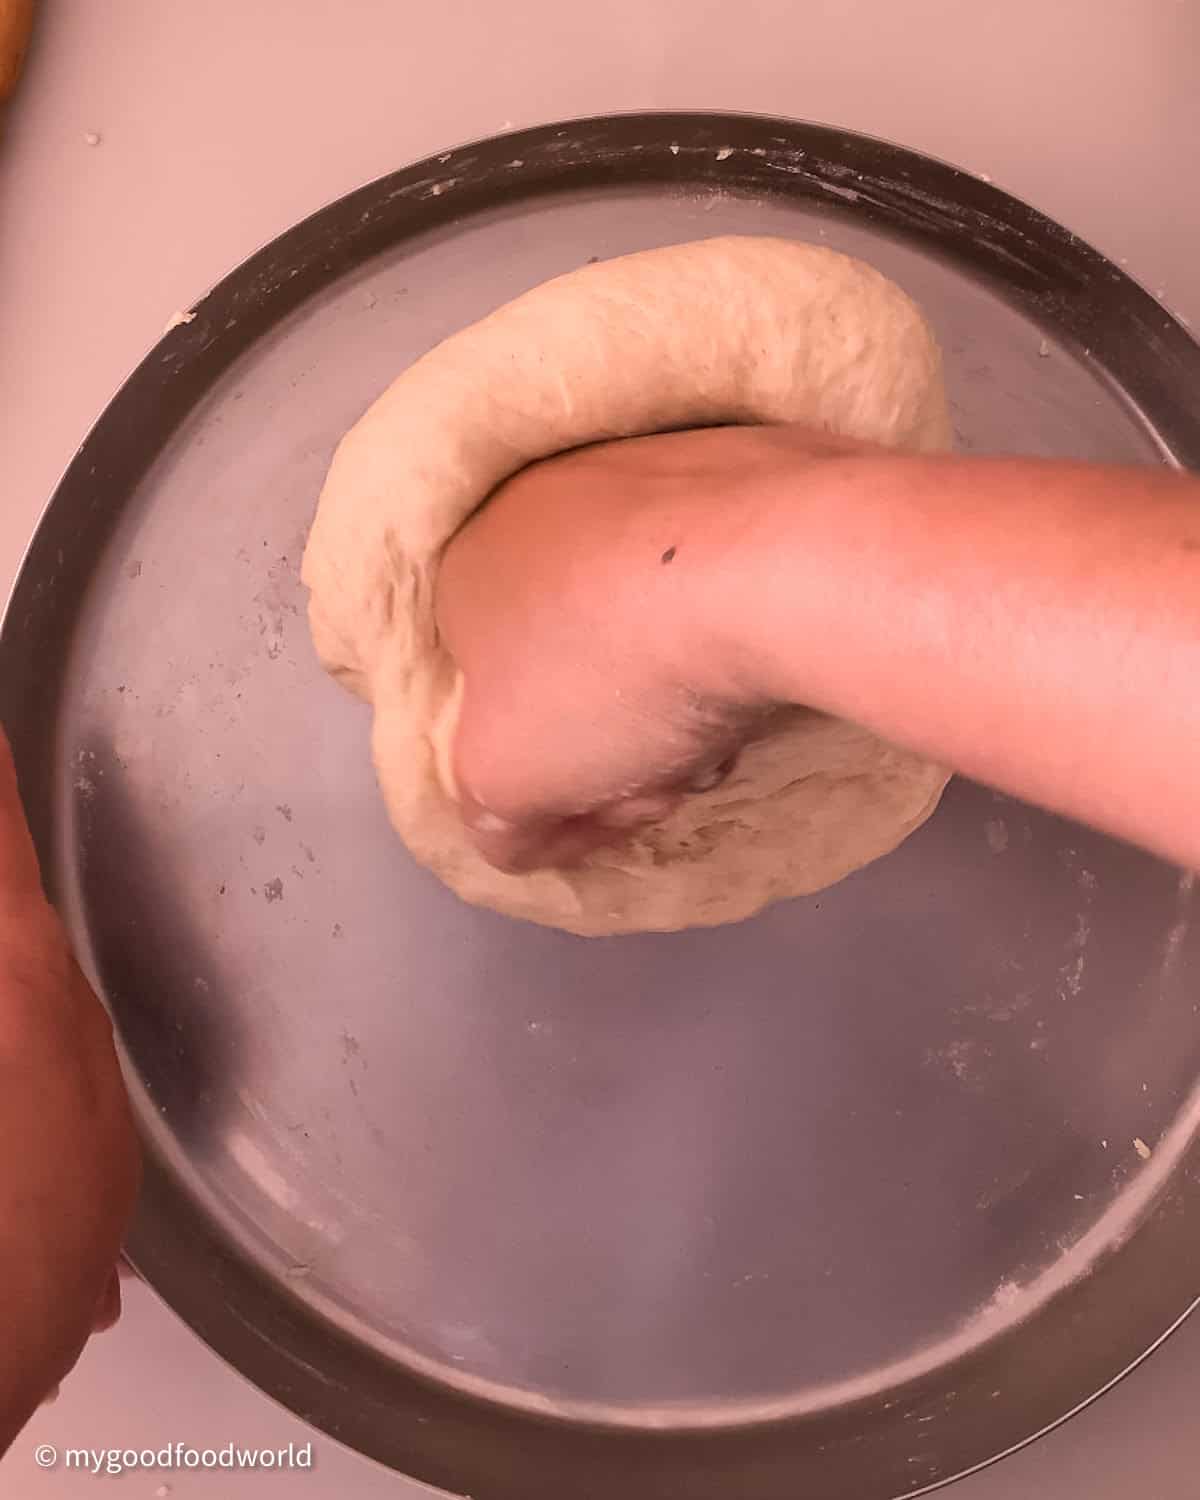 A brown coloured hand is shown to be pressing down a ball of dough which is placed on a stainless steel.